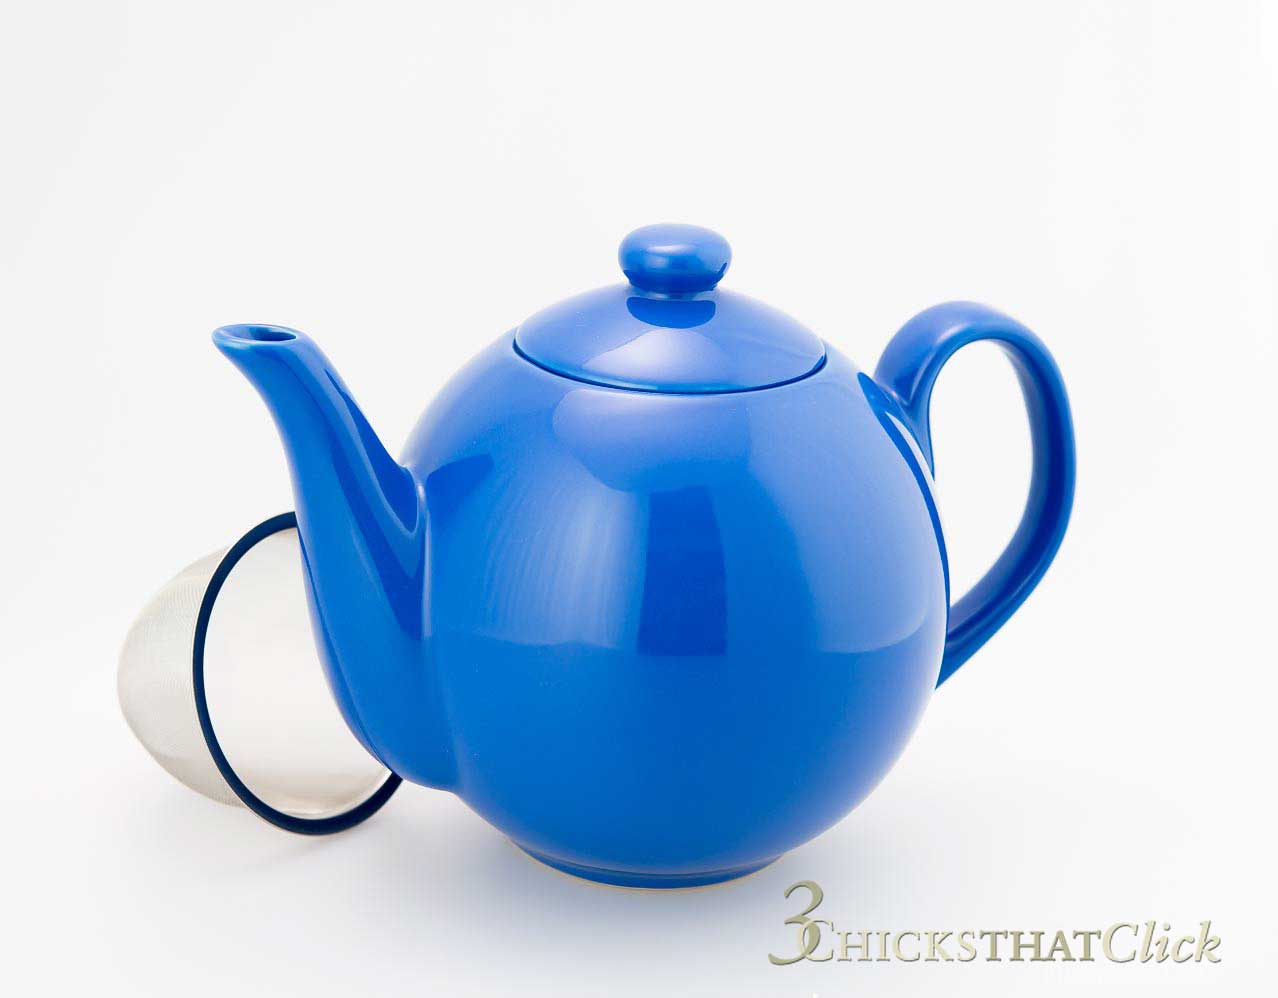 Photo of a blue teapot with tea filter